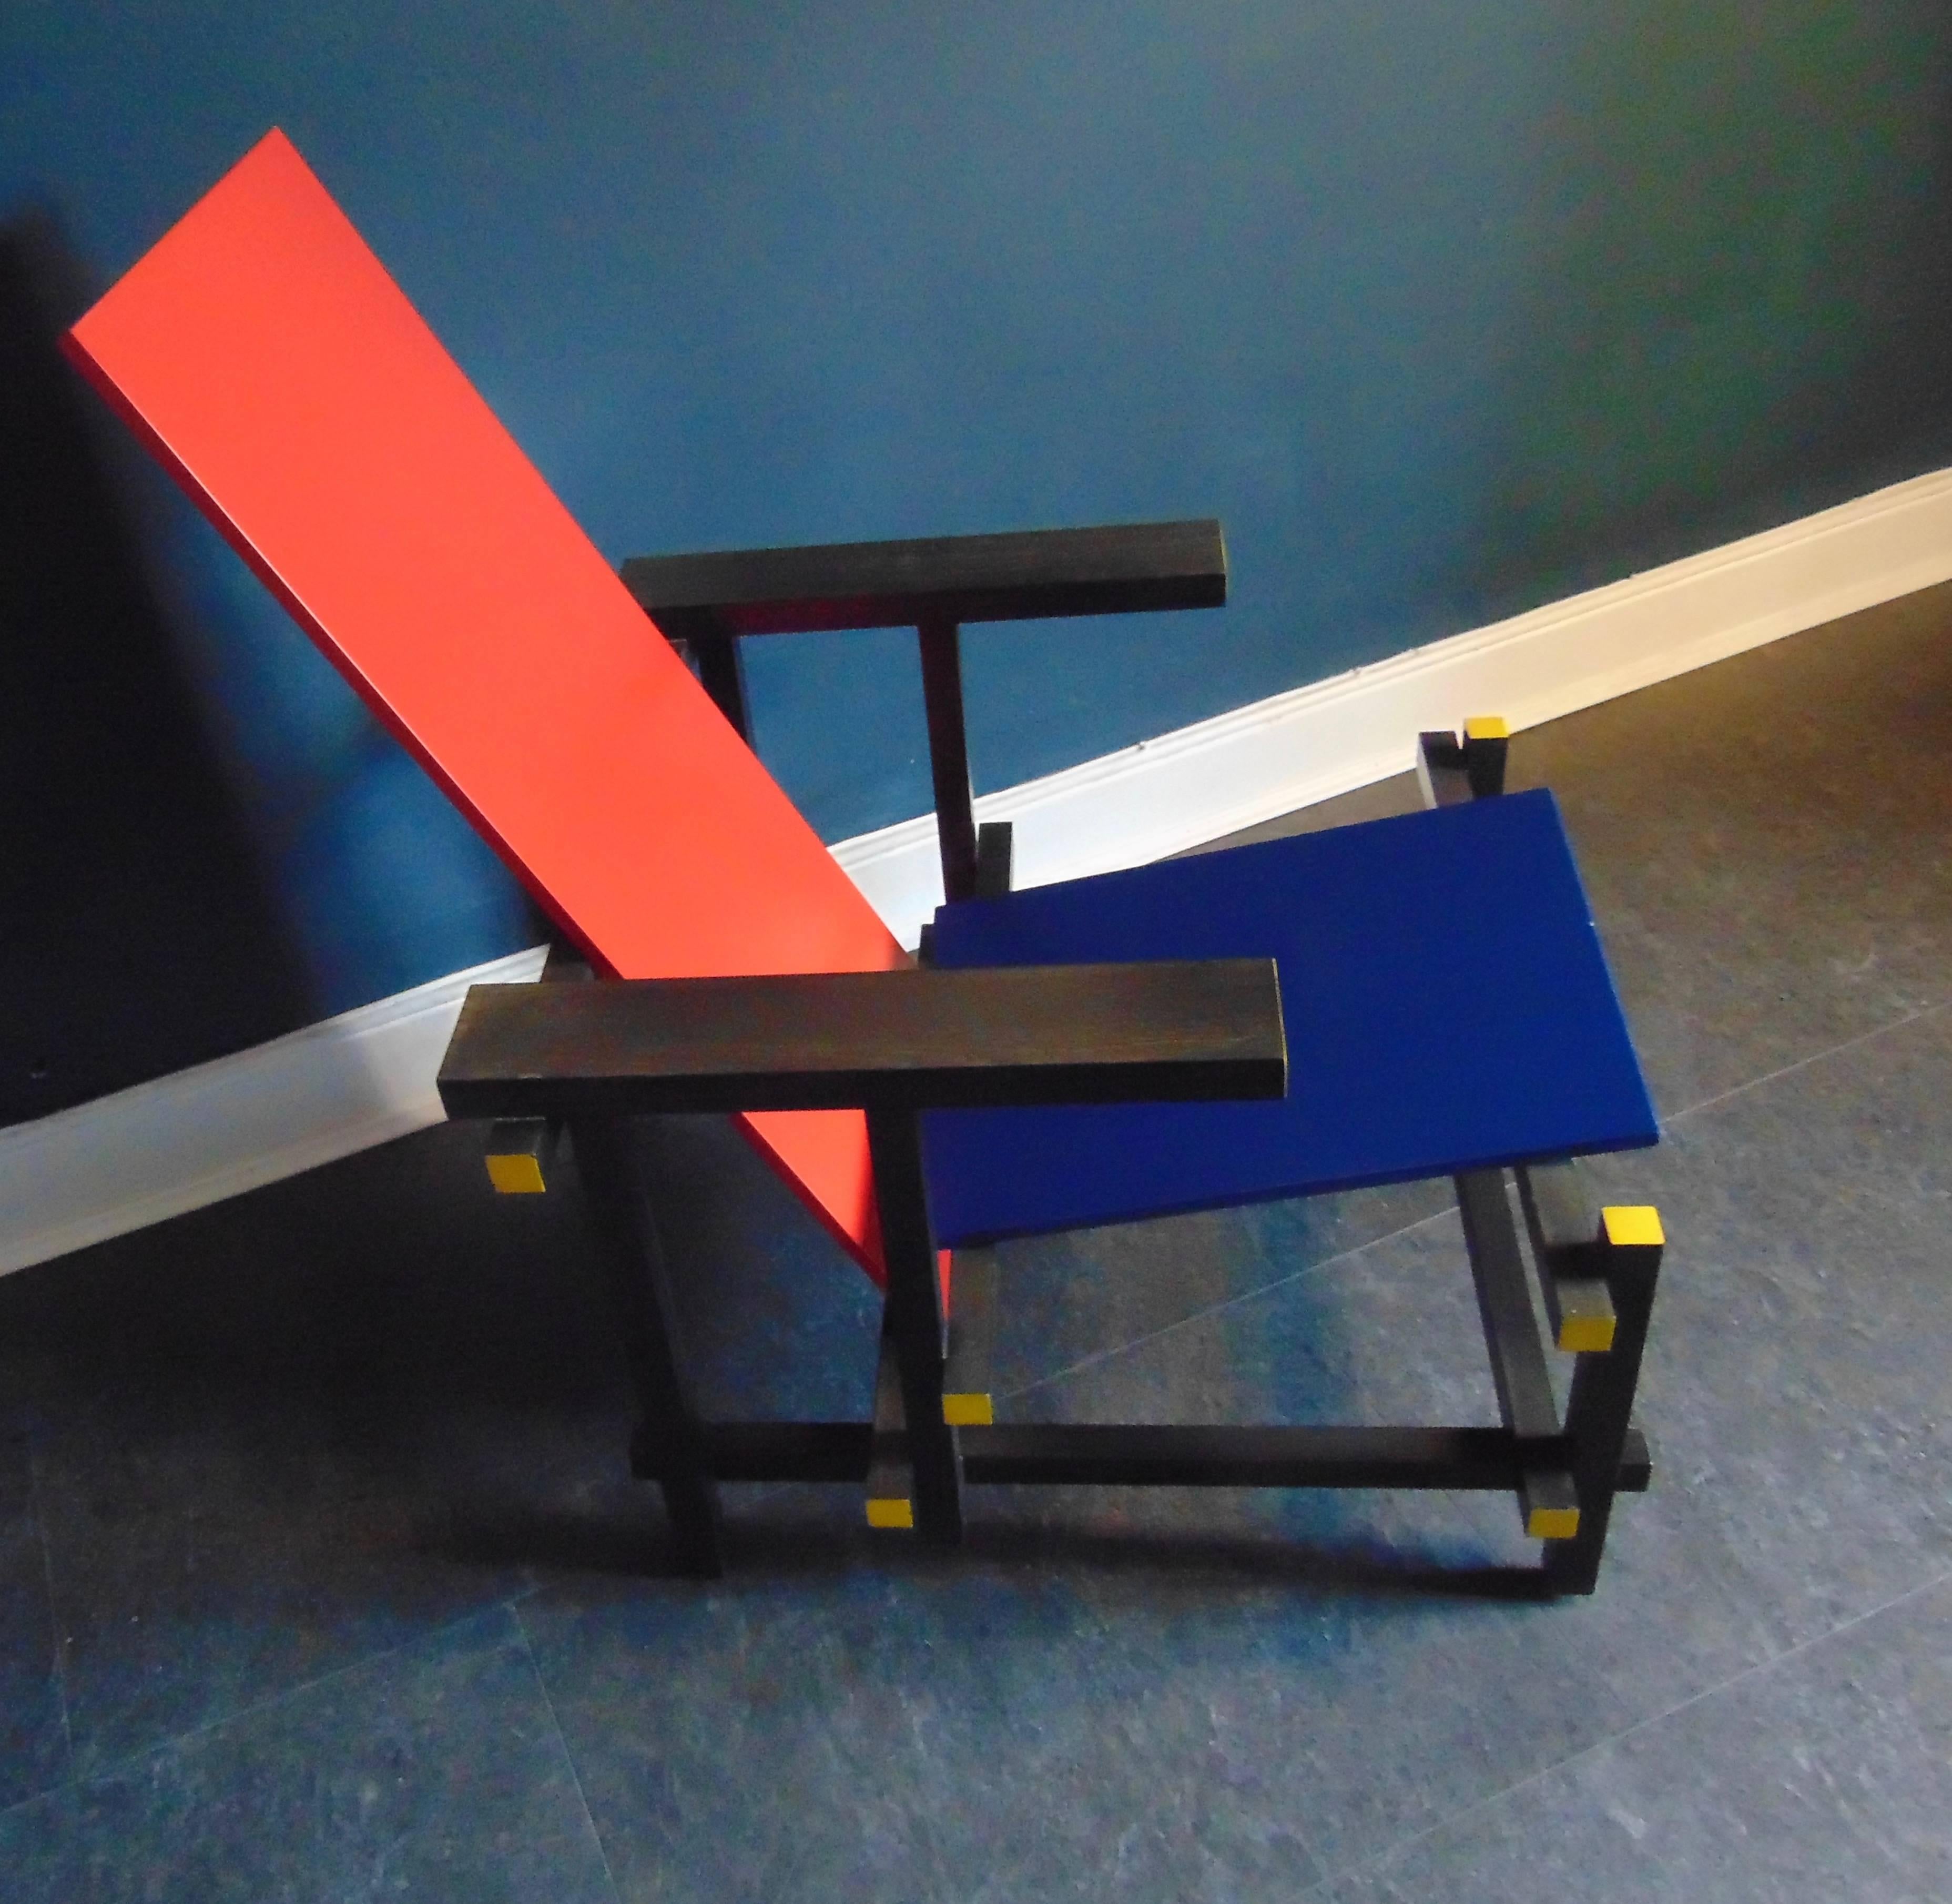 De Stijl Red and Blue Chair by Gerrit Rietveld for Cassina, Vintage, 1970s